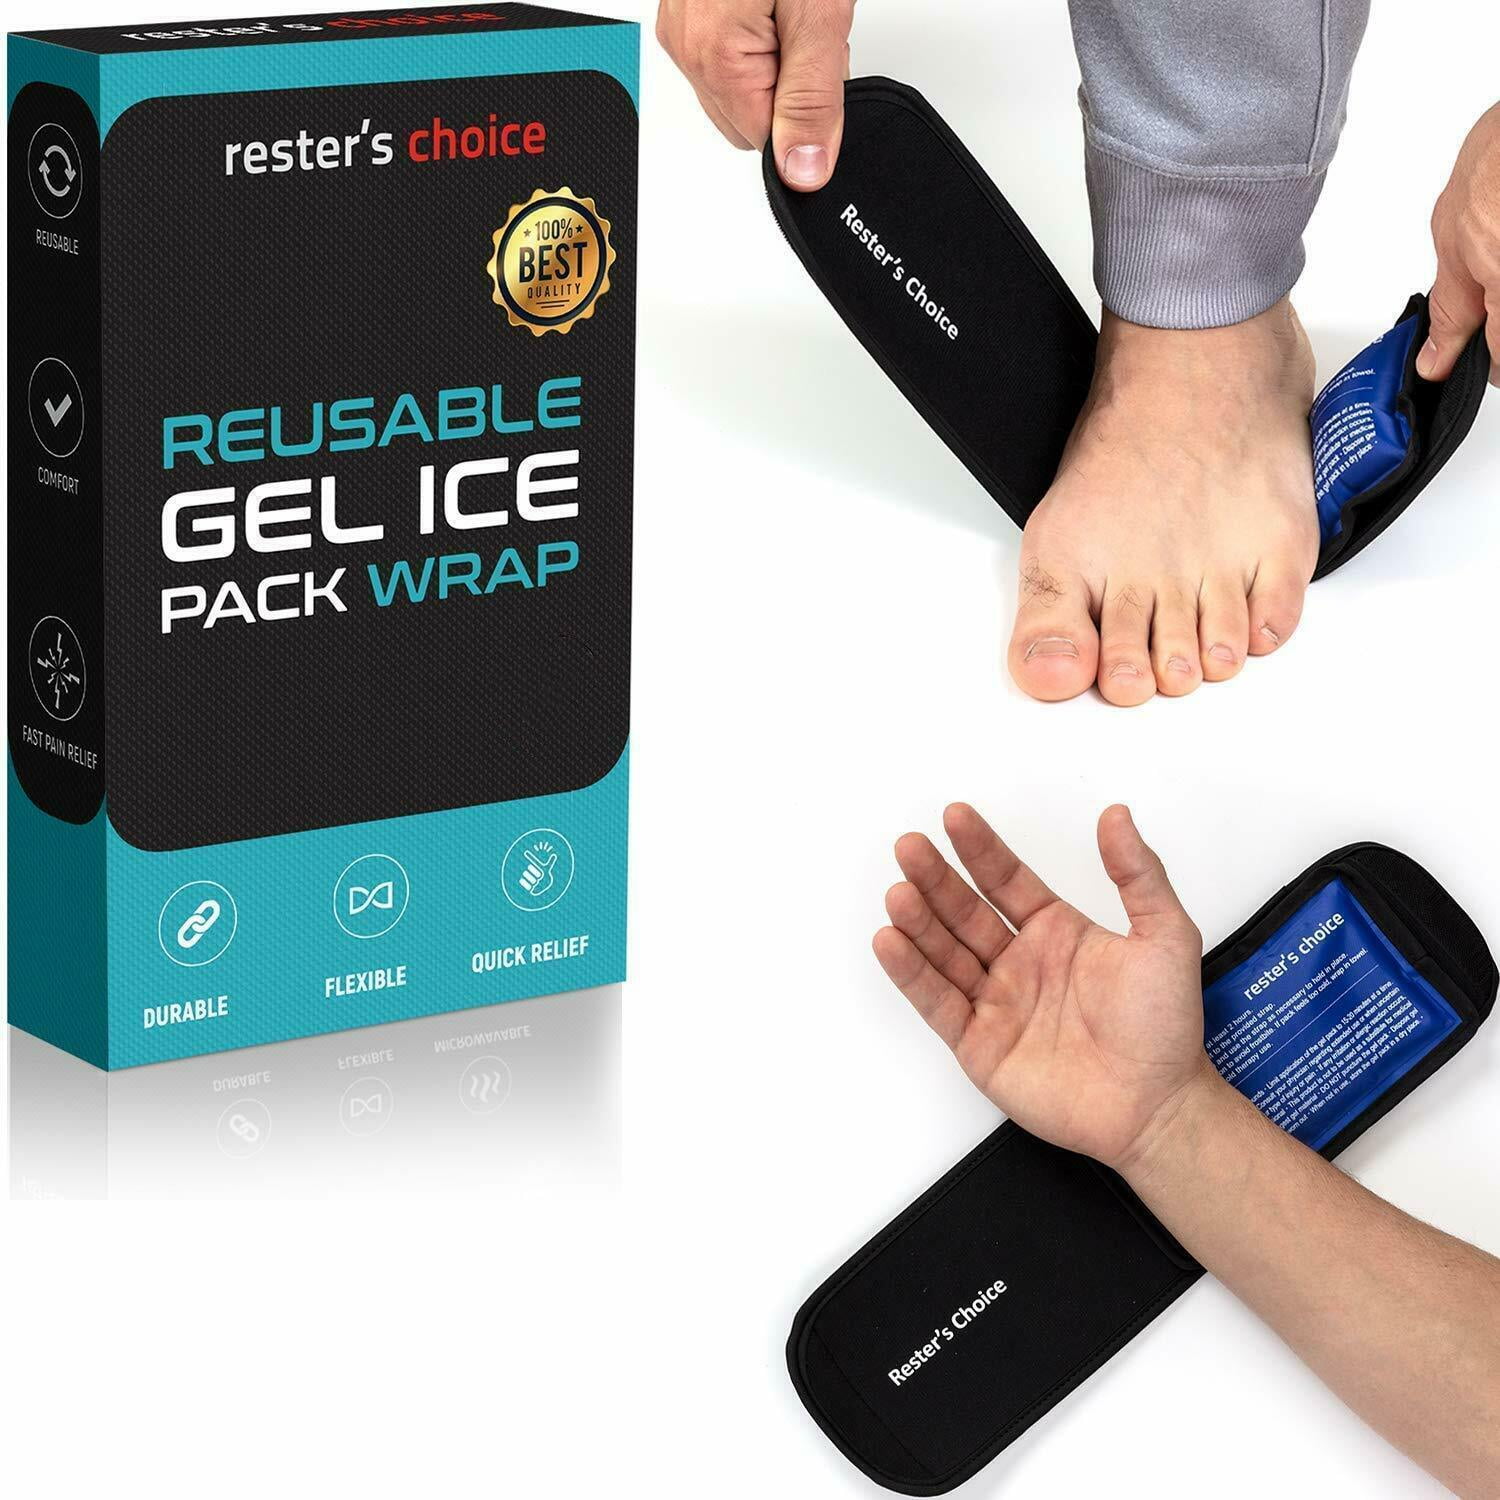 Tableta Medicinal Ausencia Cold Therapy Gel Pack (2 Packs + 1 Wrap) 3x5 in. Reusable for Foot, Hand &  More - Walmart.com